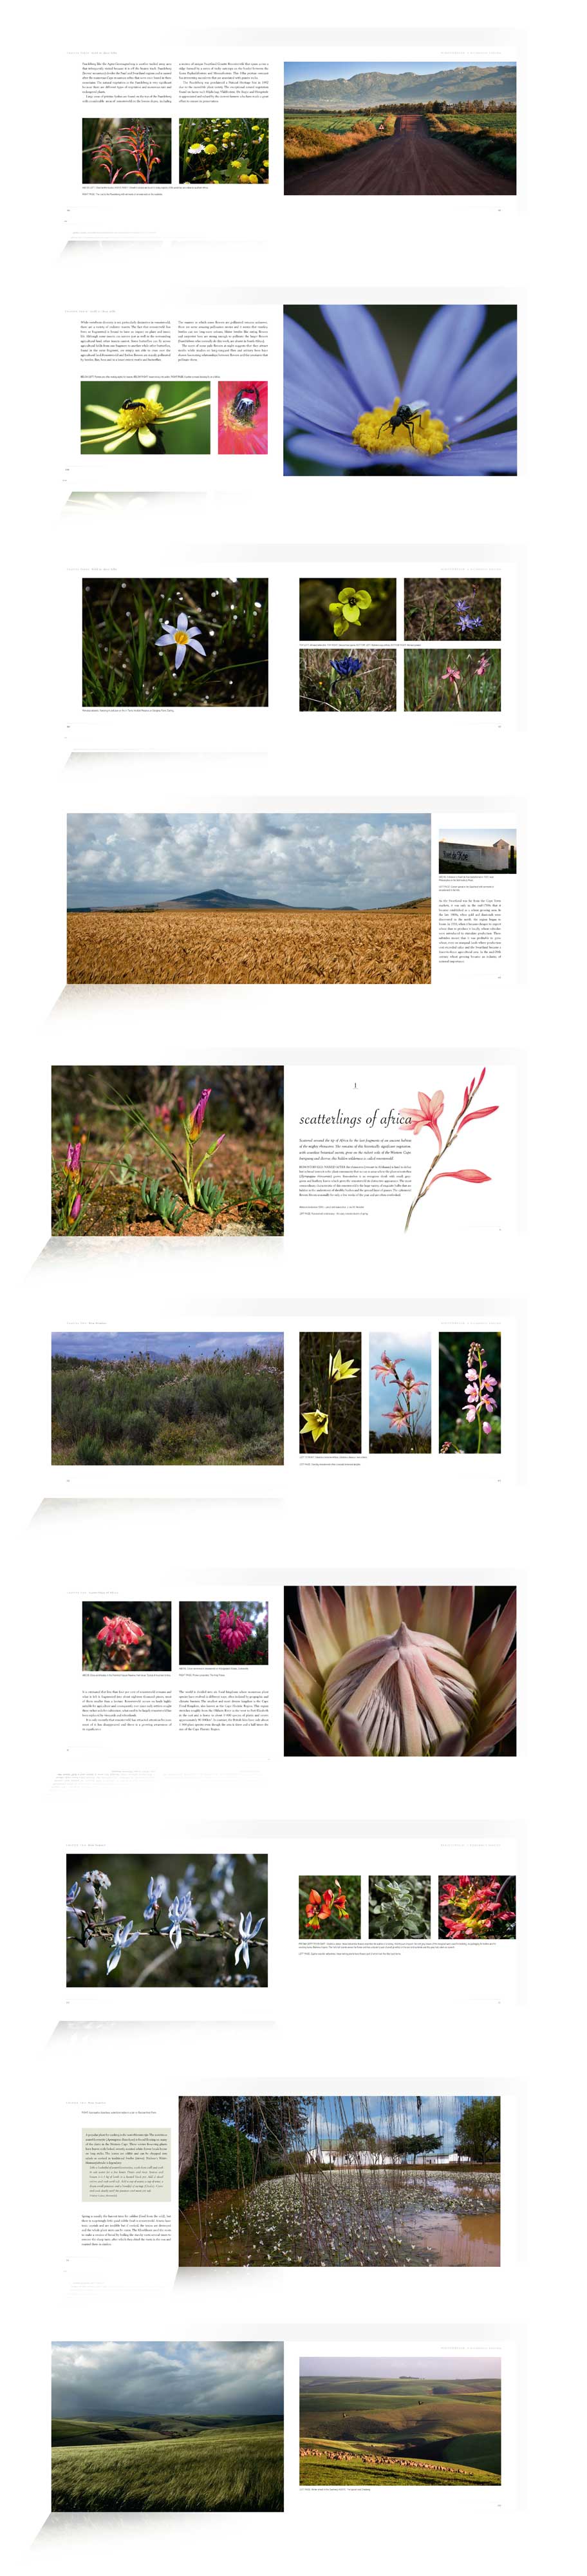 RENOSTERVELD a wilderness exposed by Ruth Parker & Brita Lomba